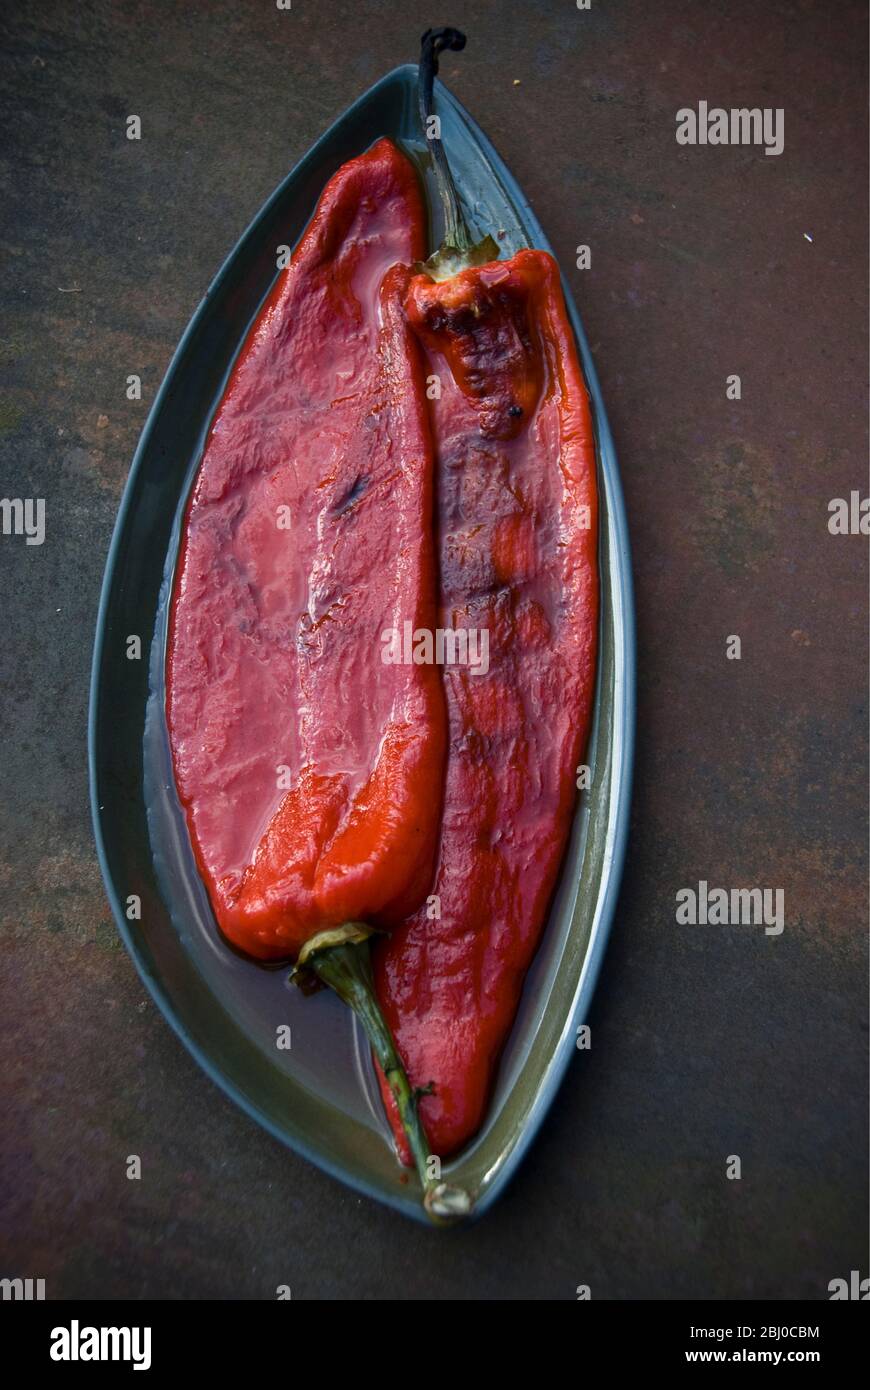 Grilled red peppers with blistered skins removed - Stock Photo